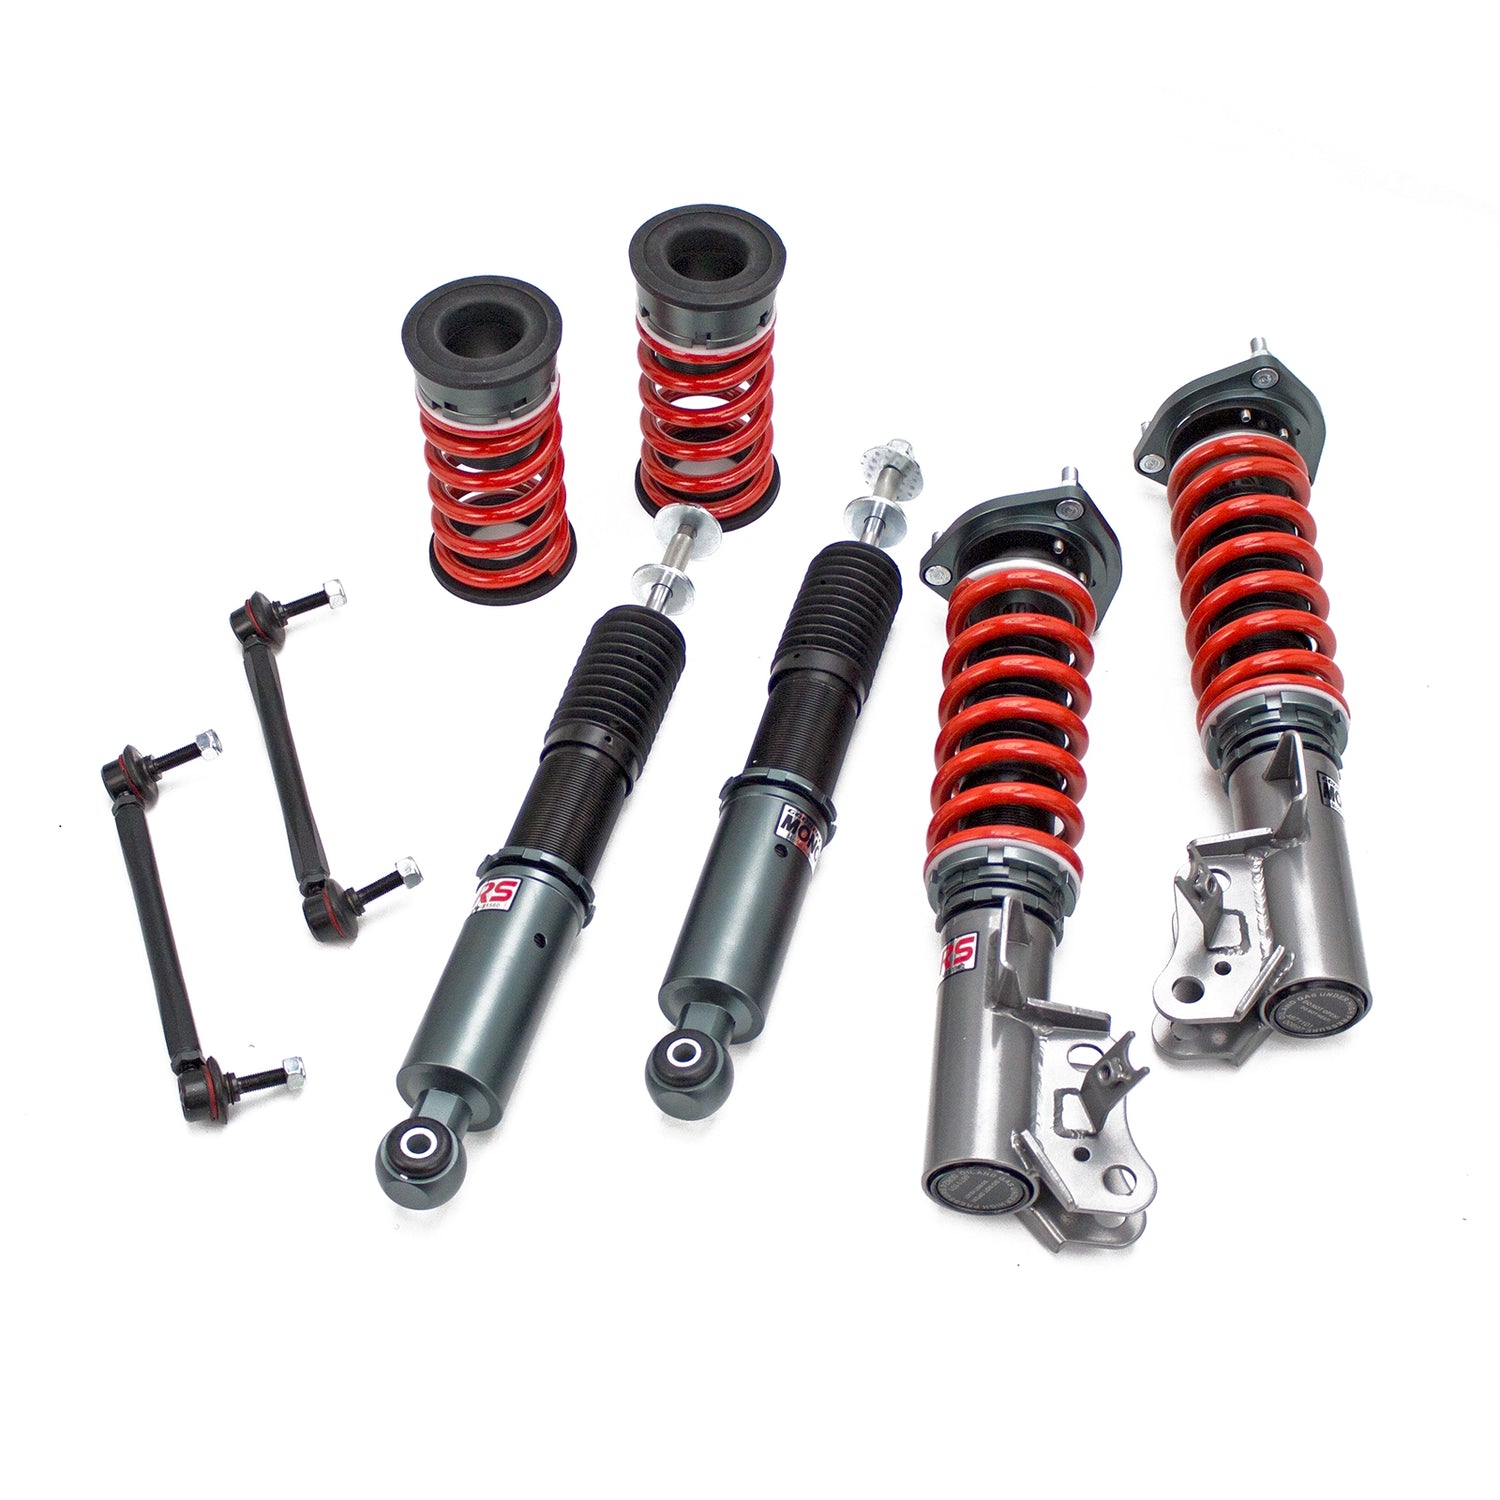 Godspeed MRS1560-B MonoRS Coilover Lowering Kit, 32 Damping Adjustment, Ride Height Adjustable